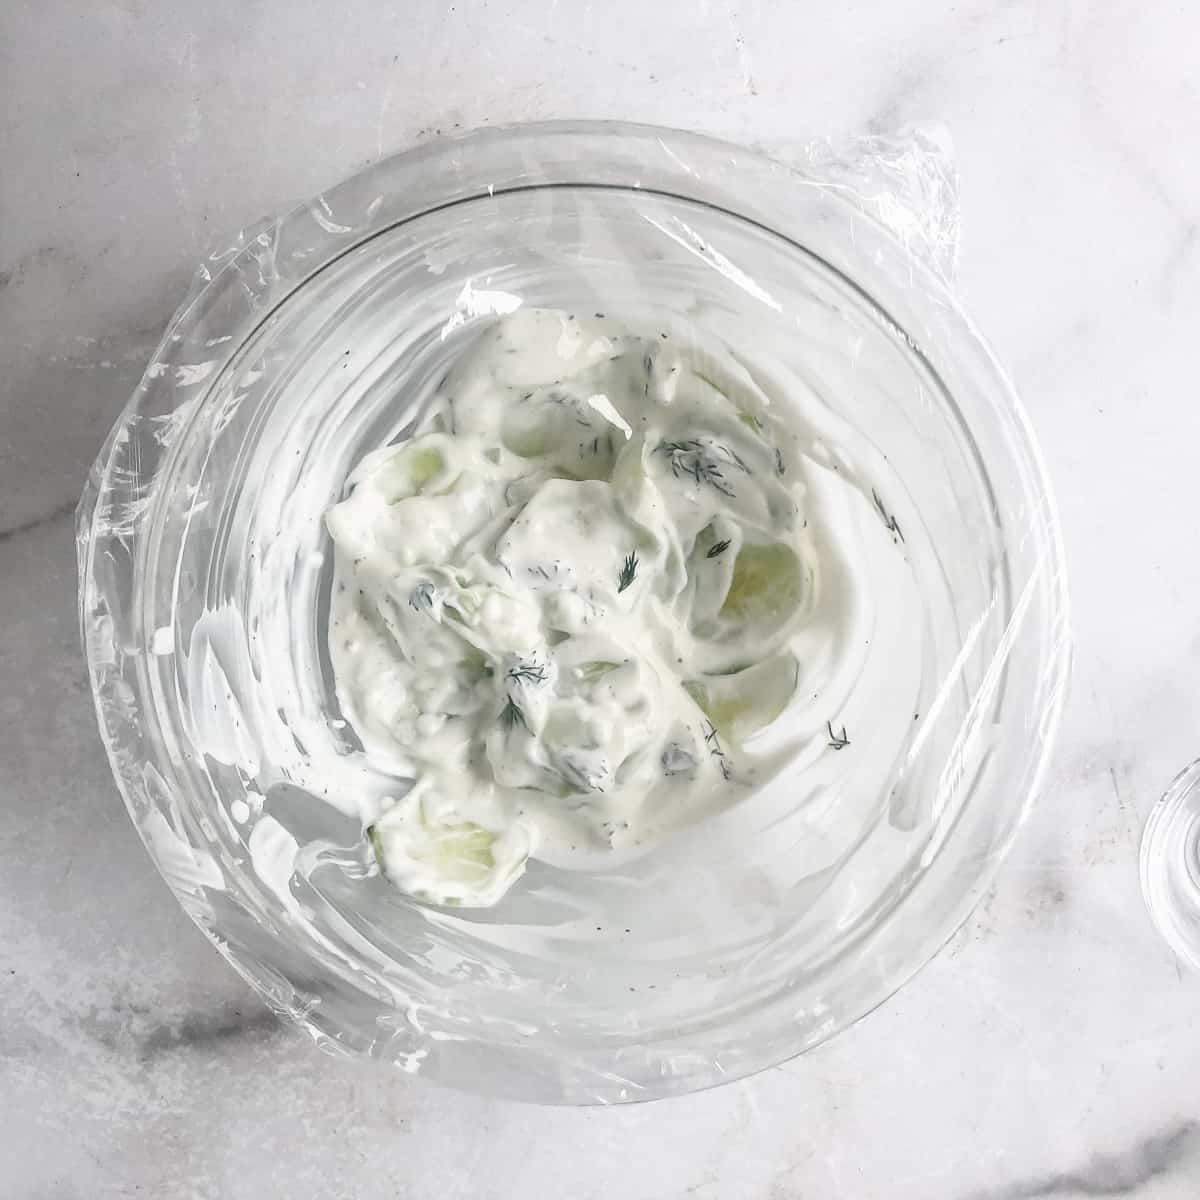 Covered bowl of cucumber and sour cream with dill.